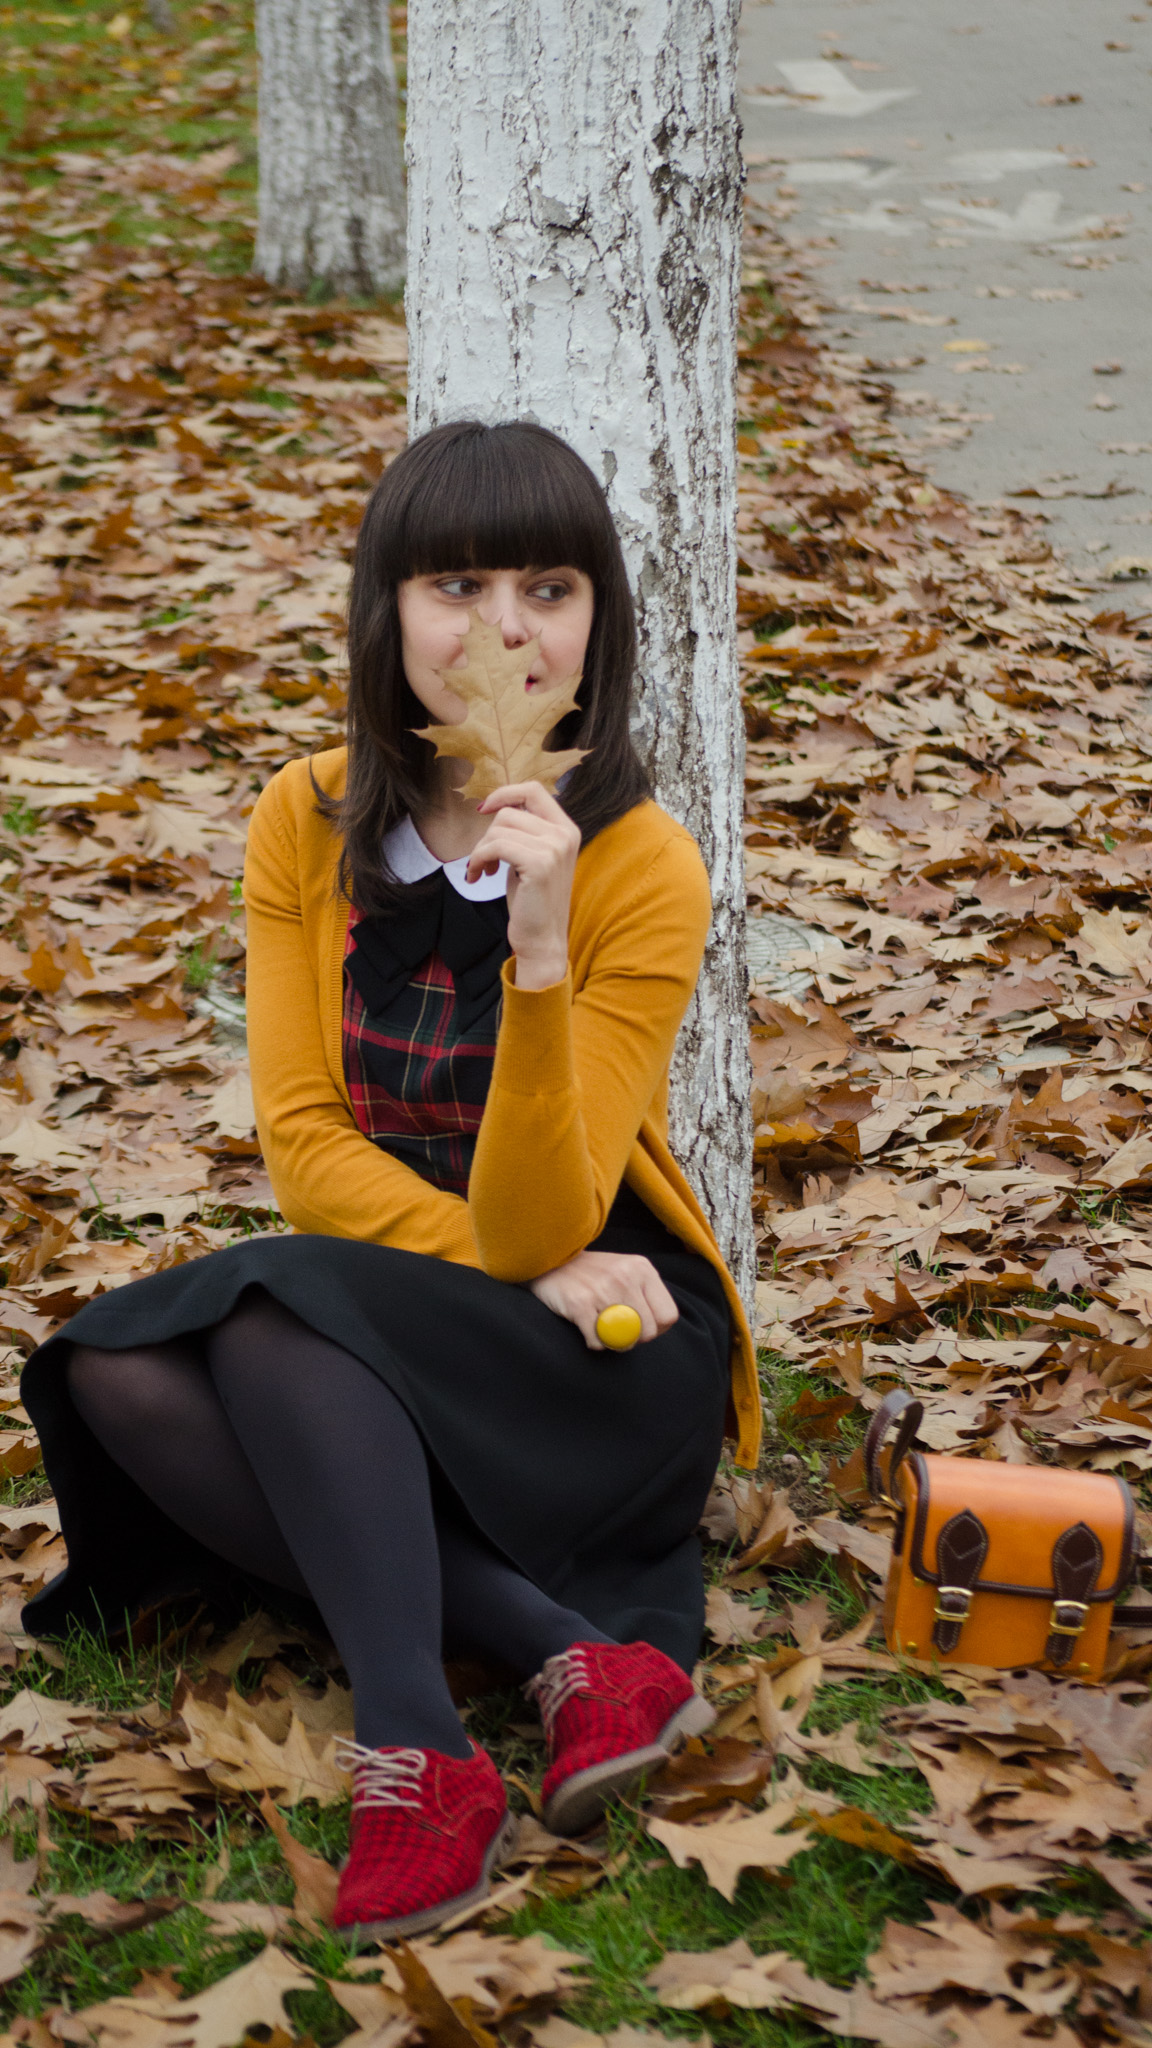 houndstooth oxfrod shoes mustard sweater tartan shirt peter pan collar black a-line skirt fall leaves school outfit bow